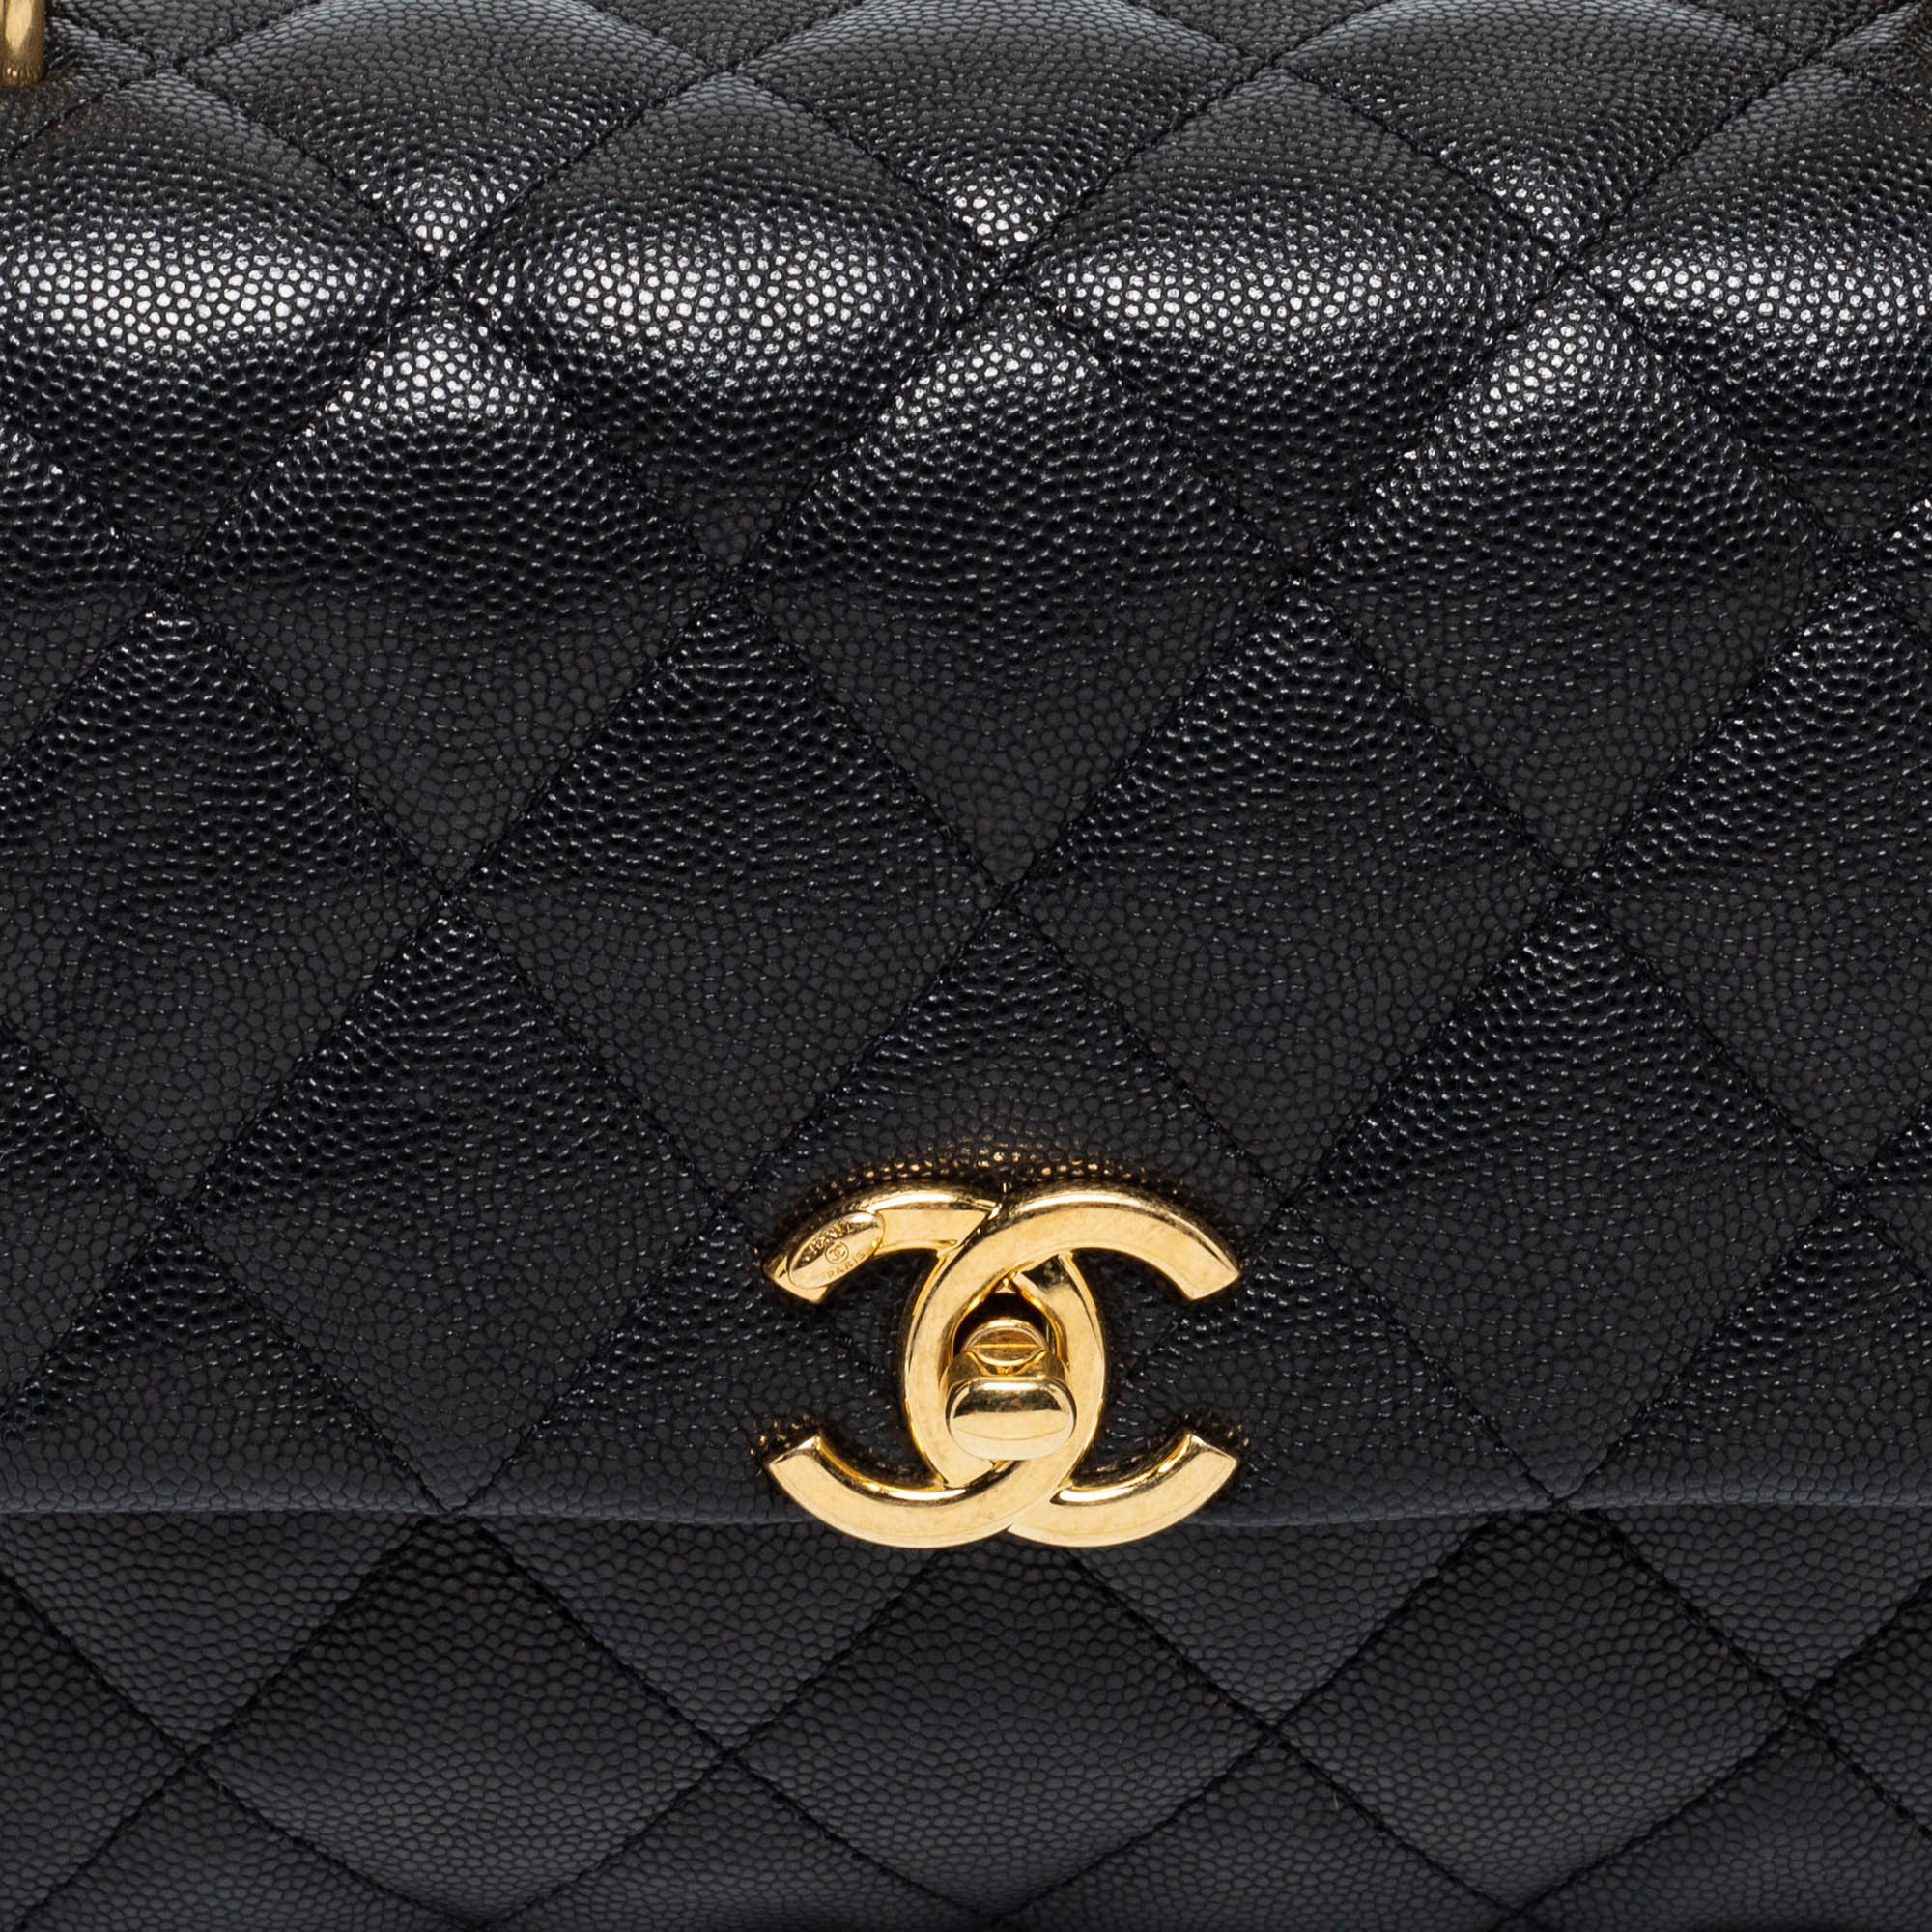 Chanel Black Caviar Quilted Leather Coco First Flap Bag Chanel